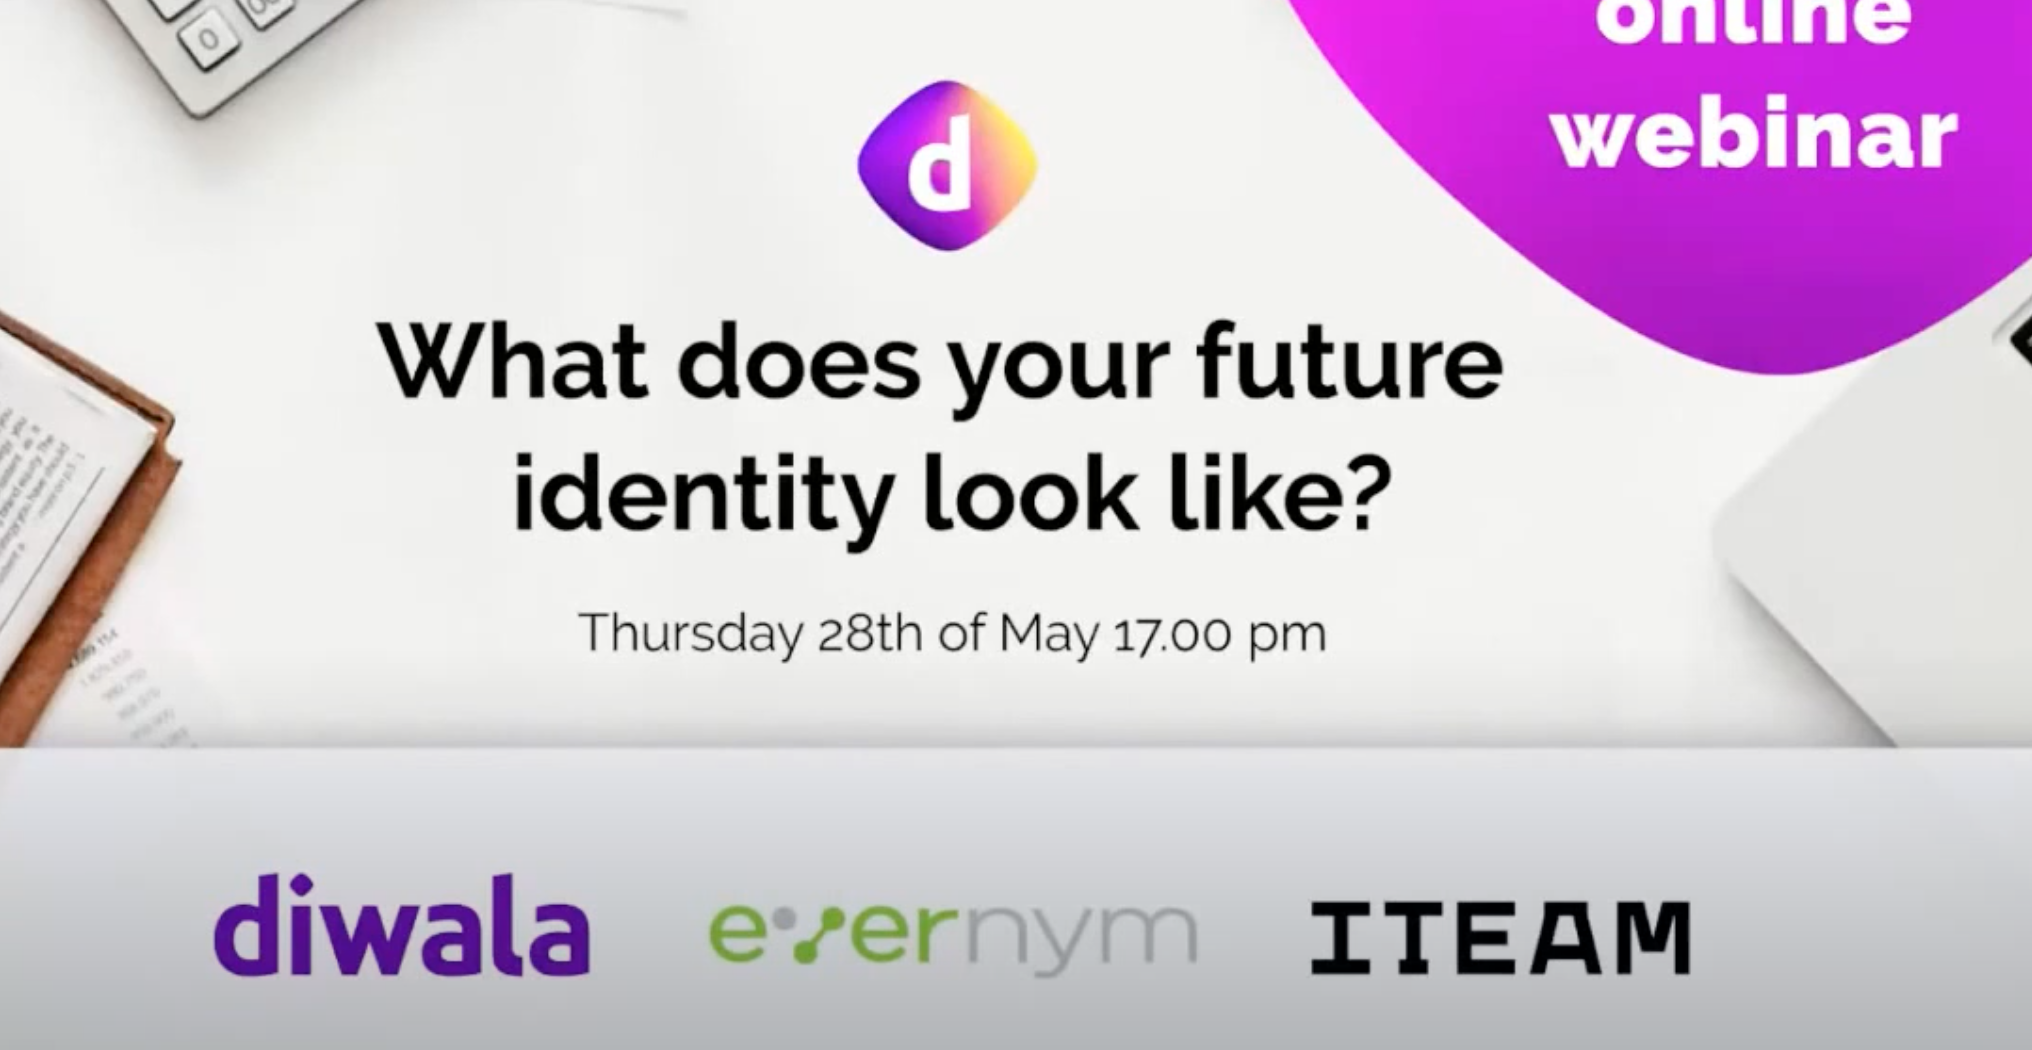 DIN at the Diwala meetup: What does your future identity look like?